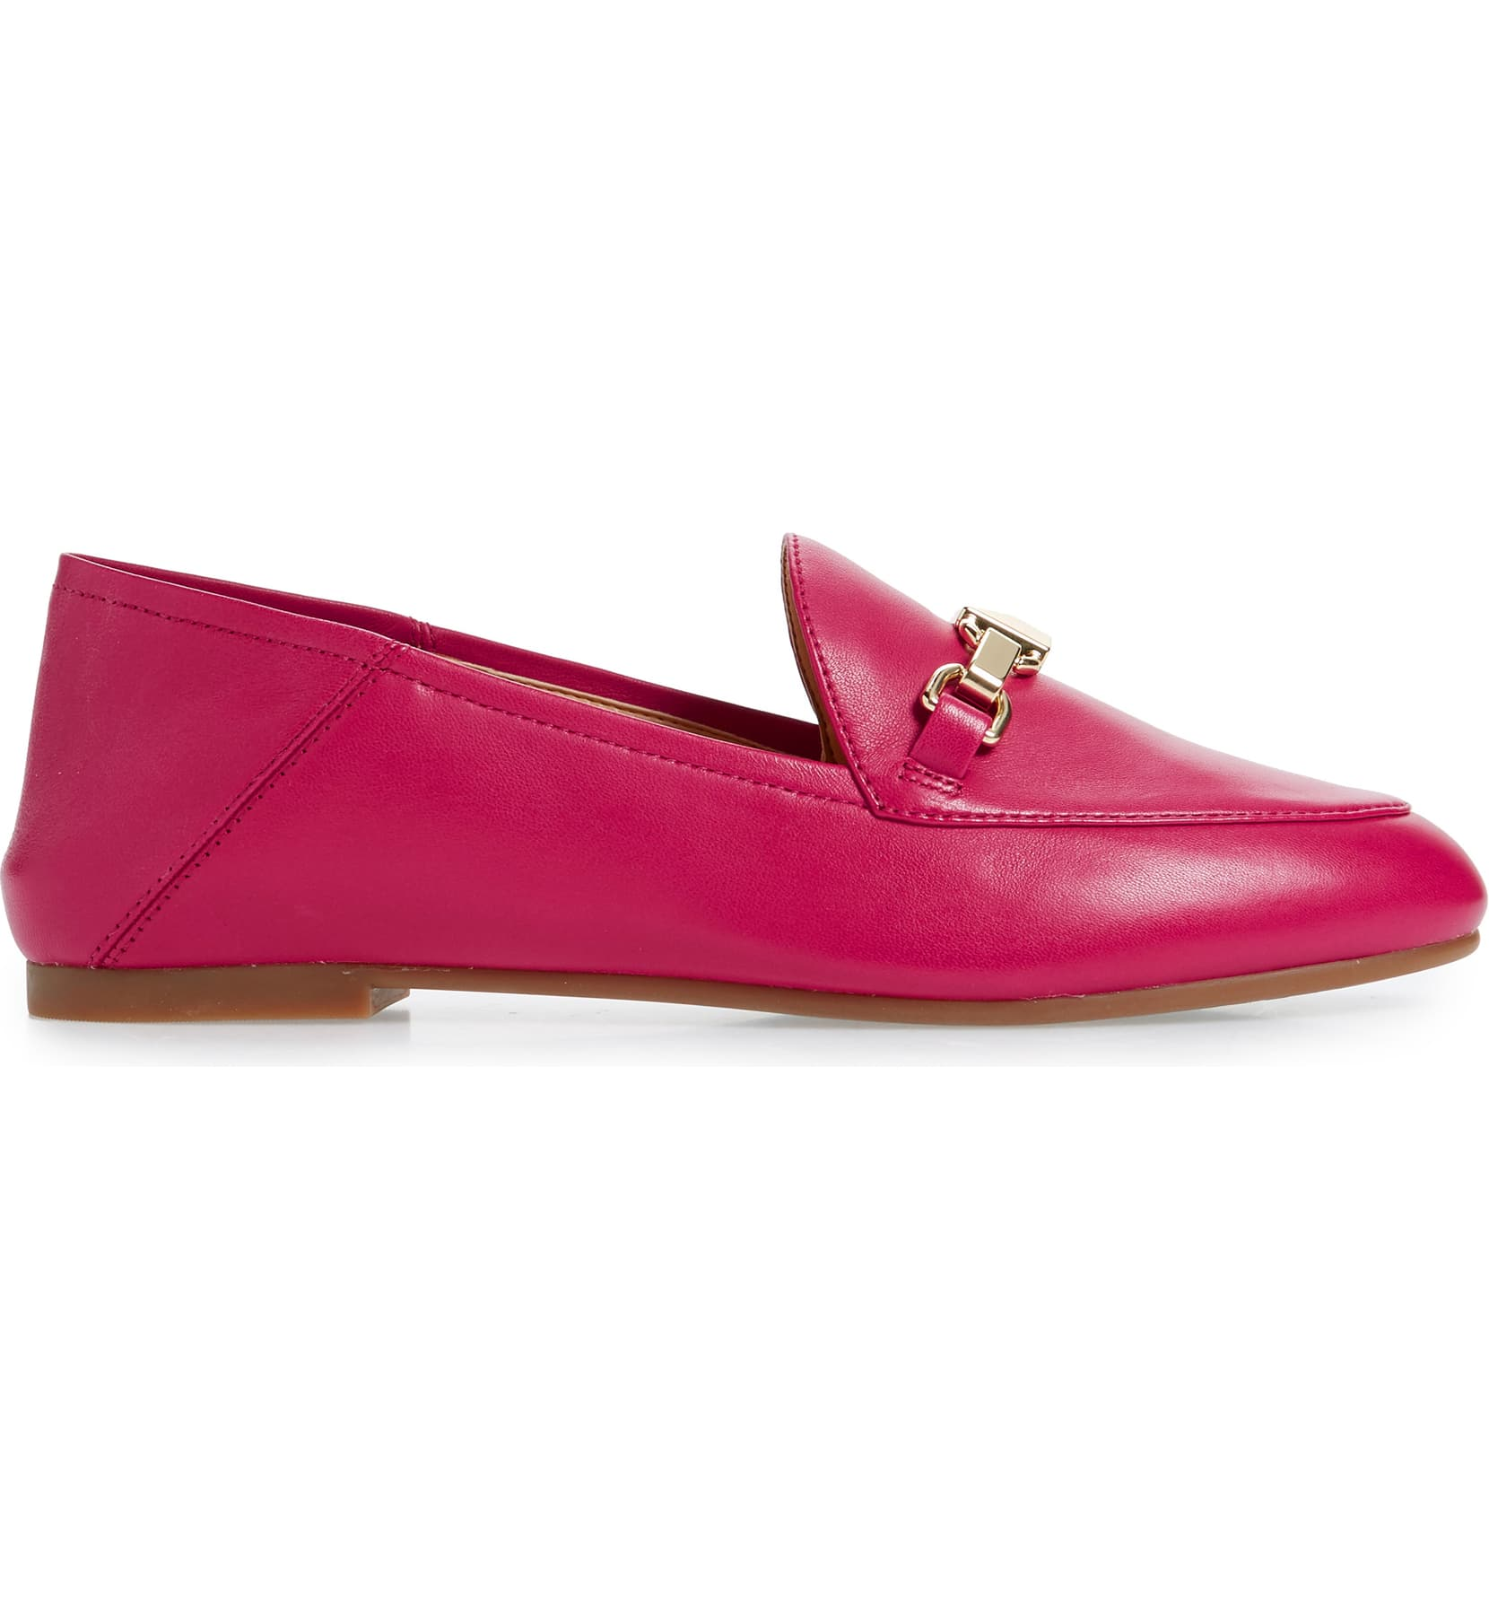 Michael Kors Womens Charlton Loafer Leather Almond Toe, Lacquer Pink ...